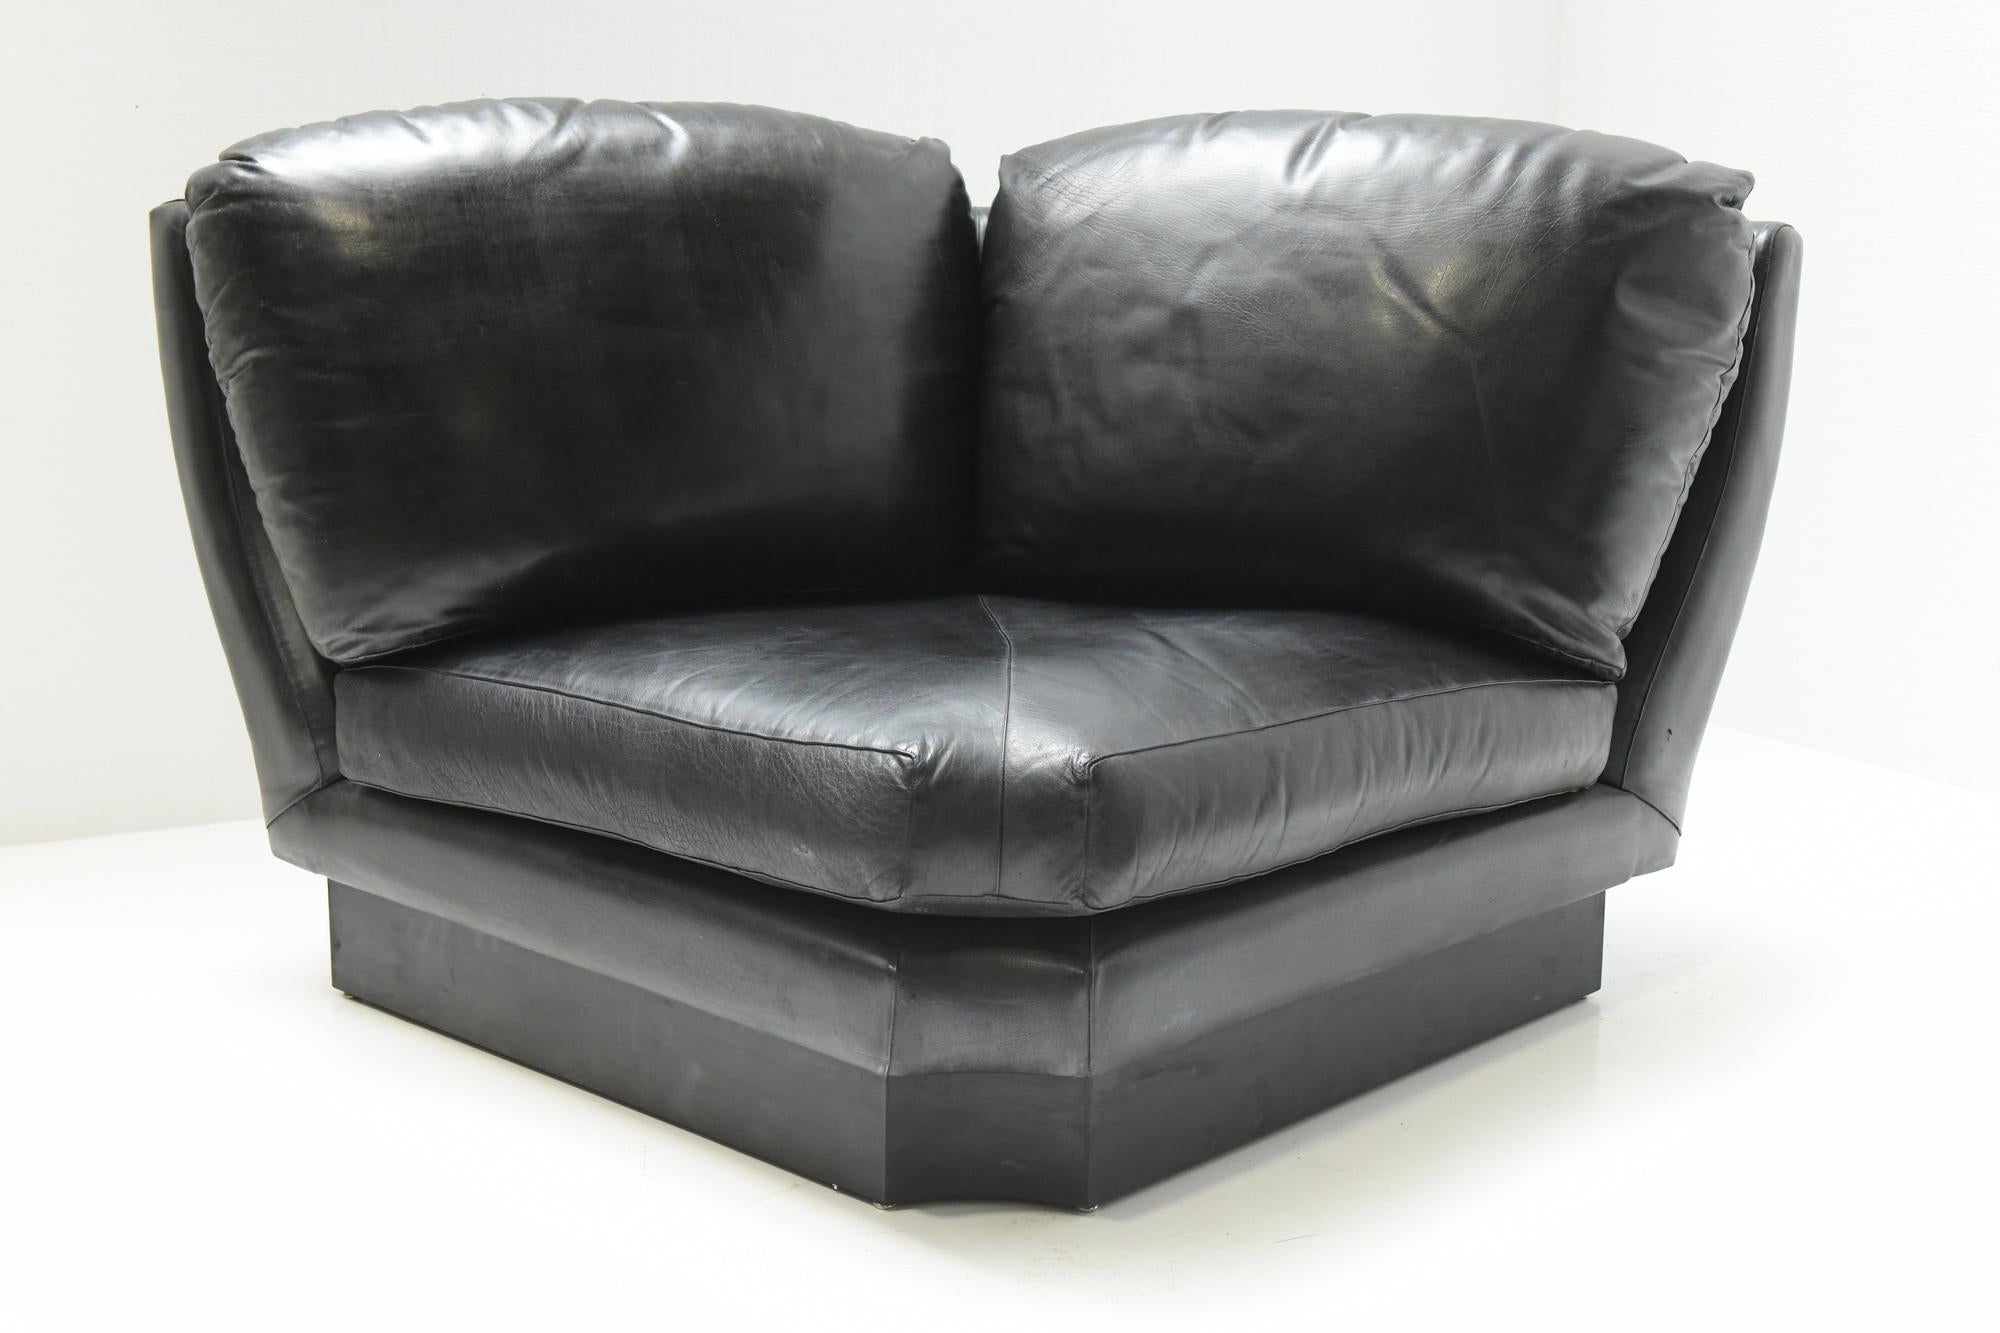 Rare Vintage Super C Modular Black Leather Sofa  by Willy Rizzo Italy For Sale 1